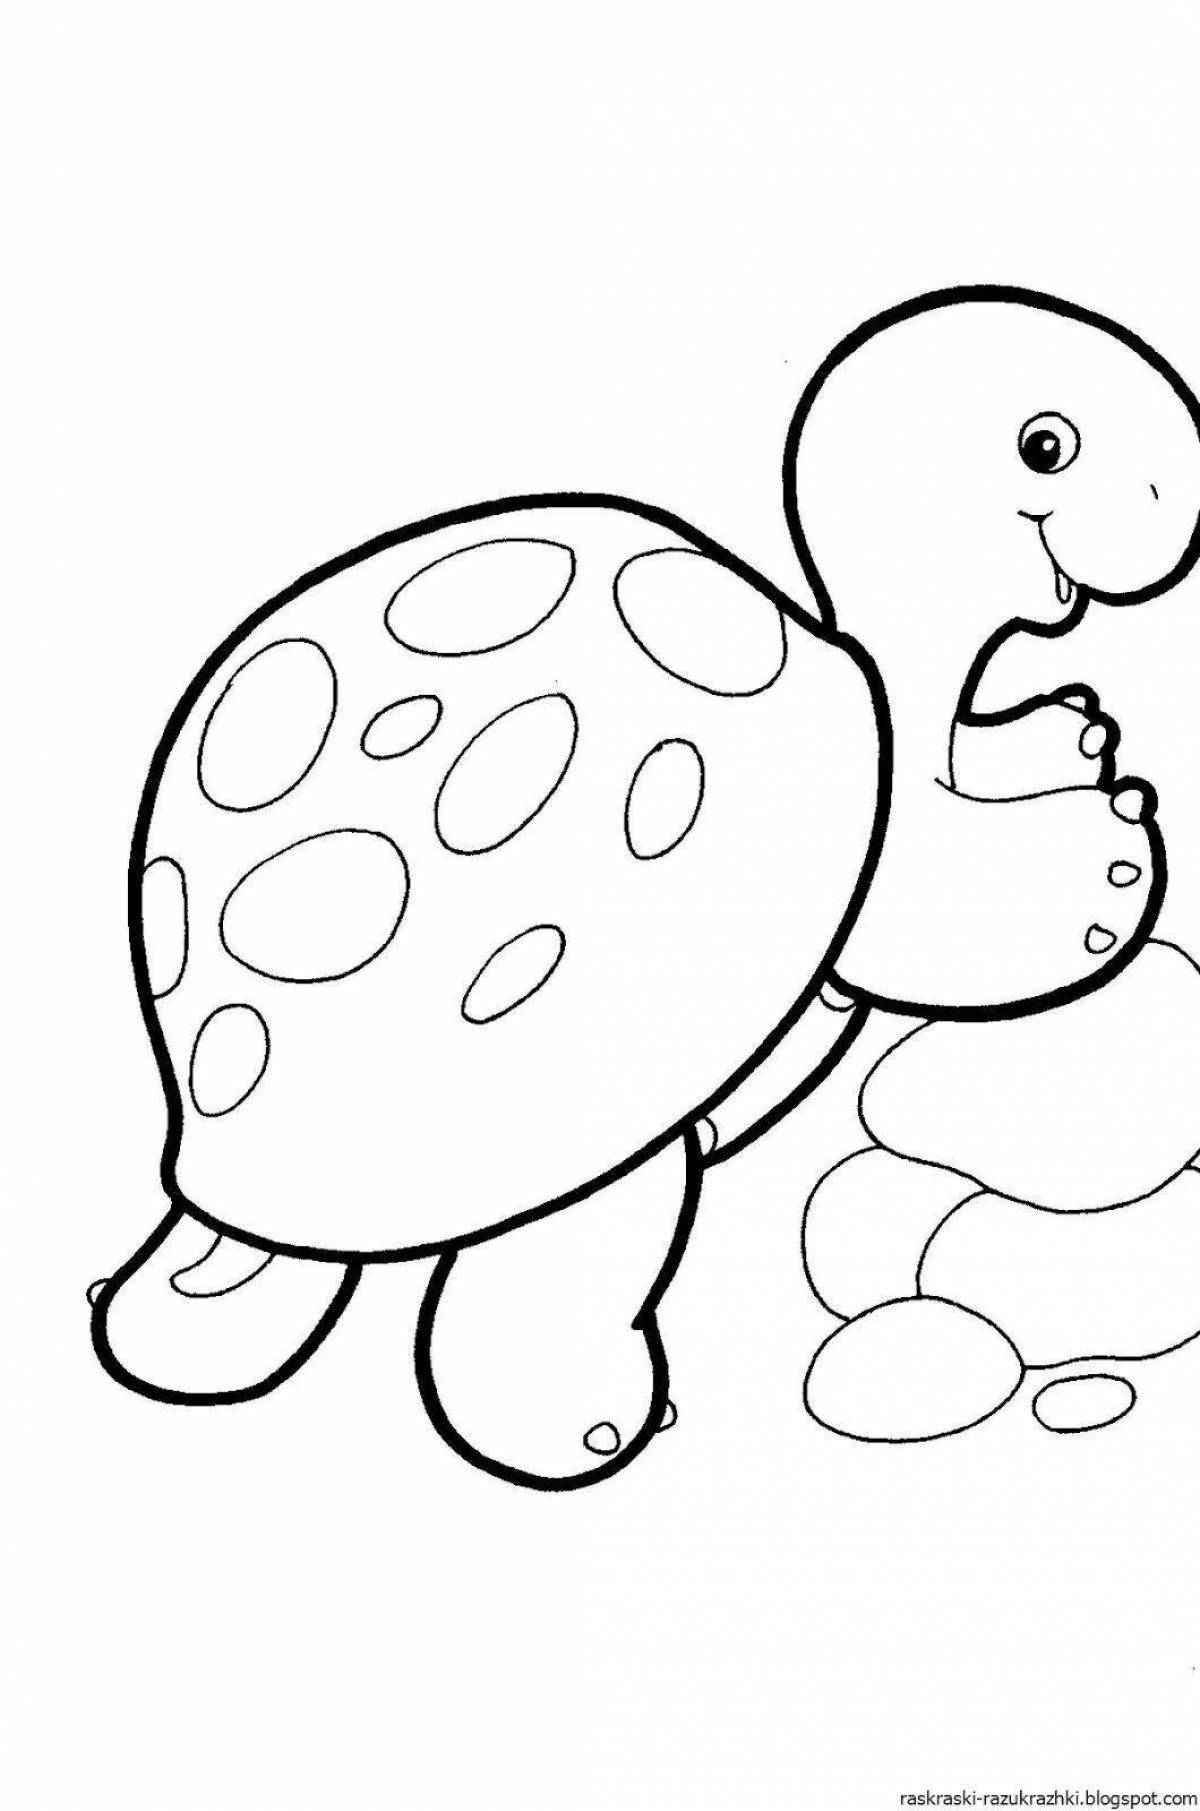 Radiant animal coloring pages for 5 year olds